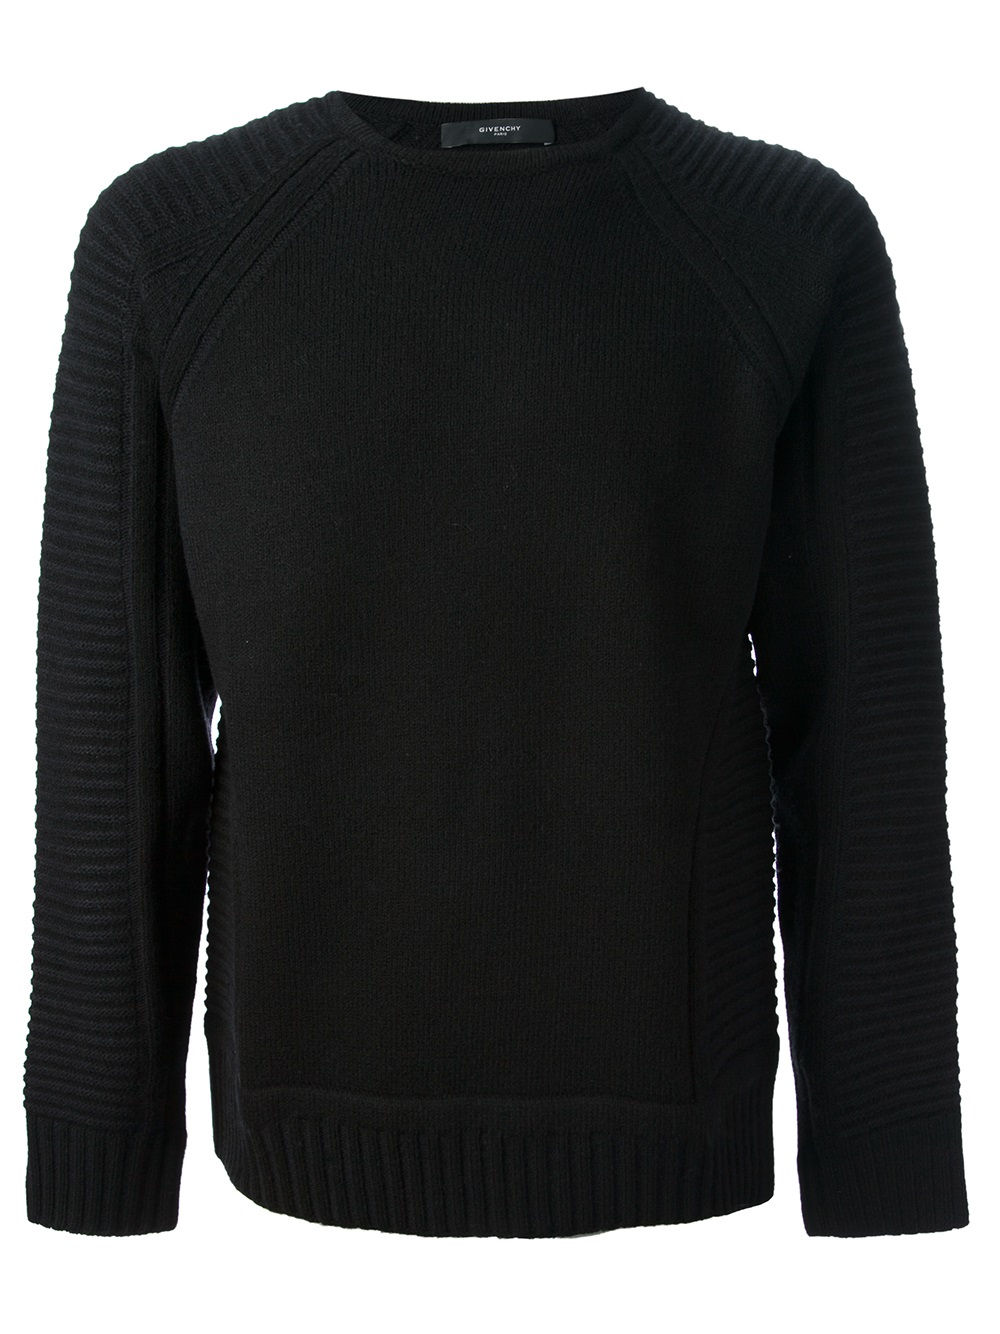 Lyst - Givenchy Knitted Jumper in Black for Men